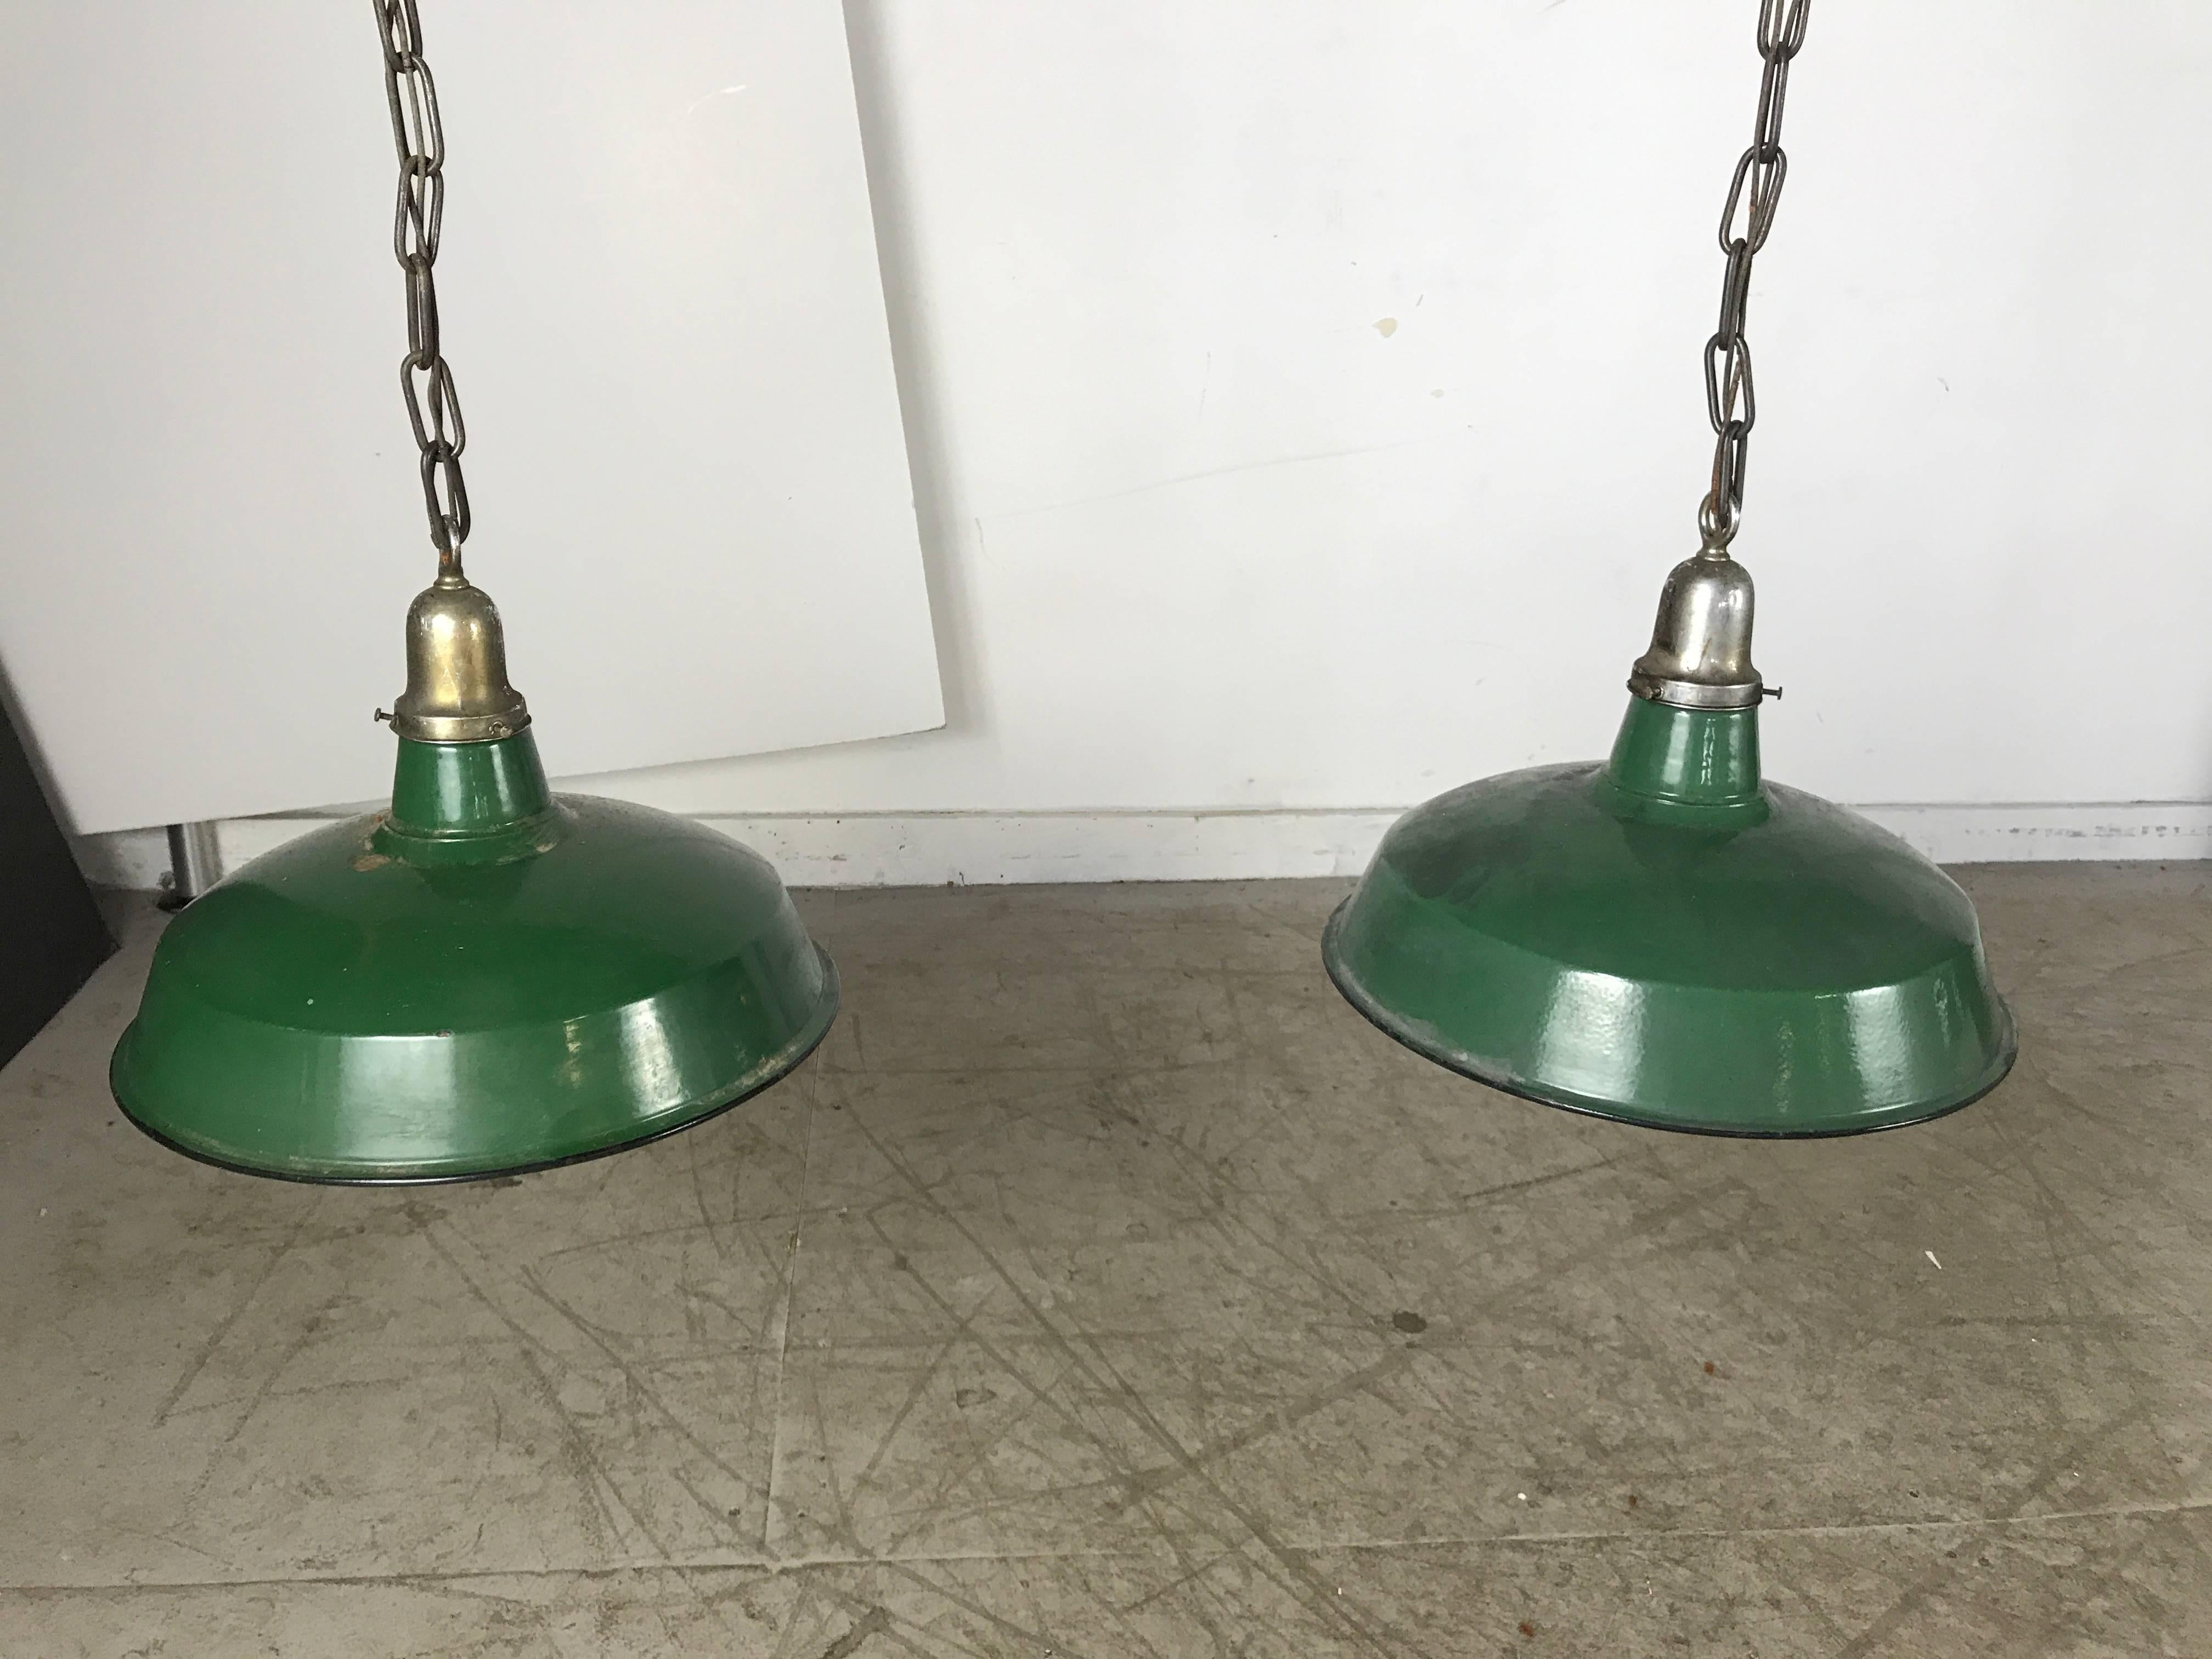 Unusual 1920s four-pendant bronze and nickel light fixture, from a turn of the century billiard hall in Jamestown, New York.

Featuring bronze standard with stunning machined nickel Art Deco details. Centre drop finial as well as stylized nickel